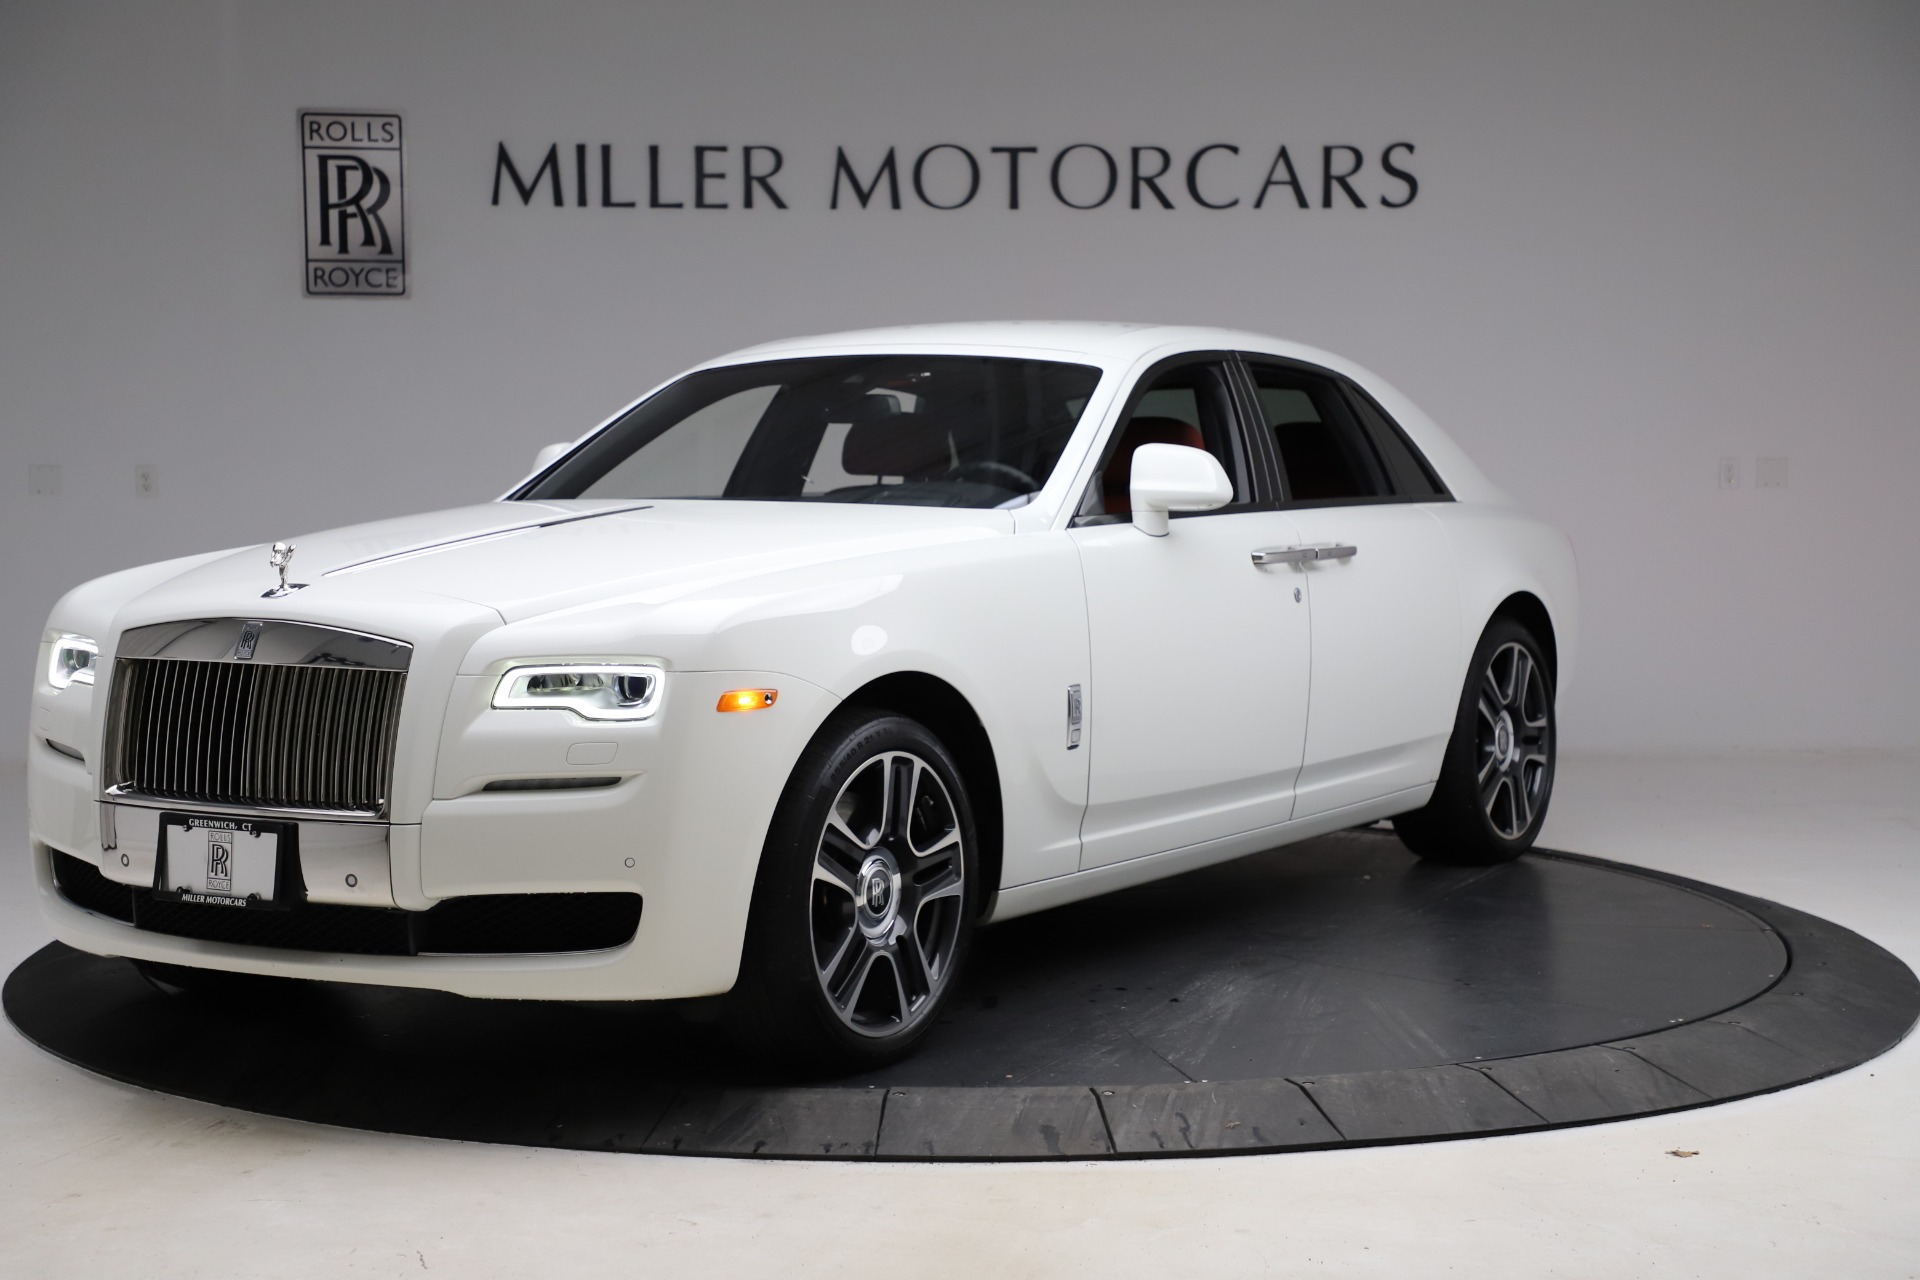 Used 2017 Rolls-Royce Ghost for sale Sold at Maserati of Greenwich in Greenwich CT 06830 1